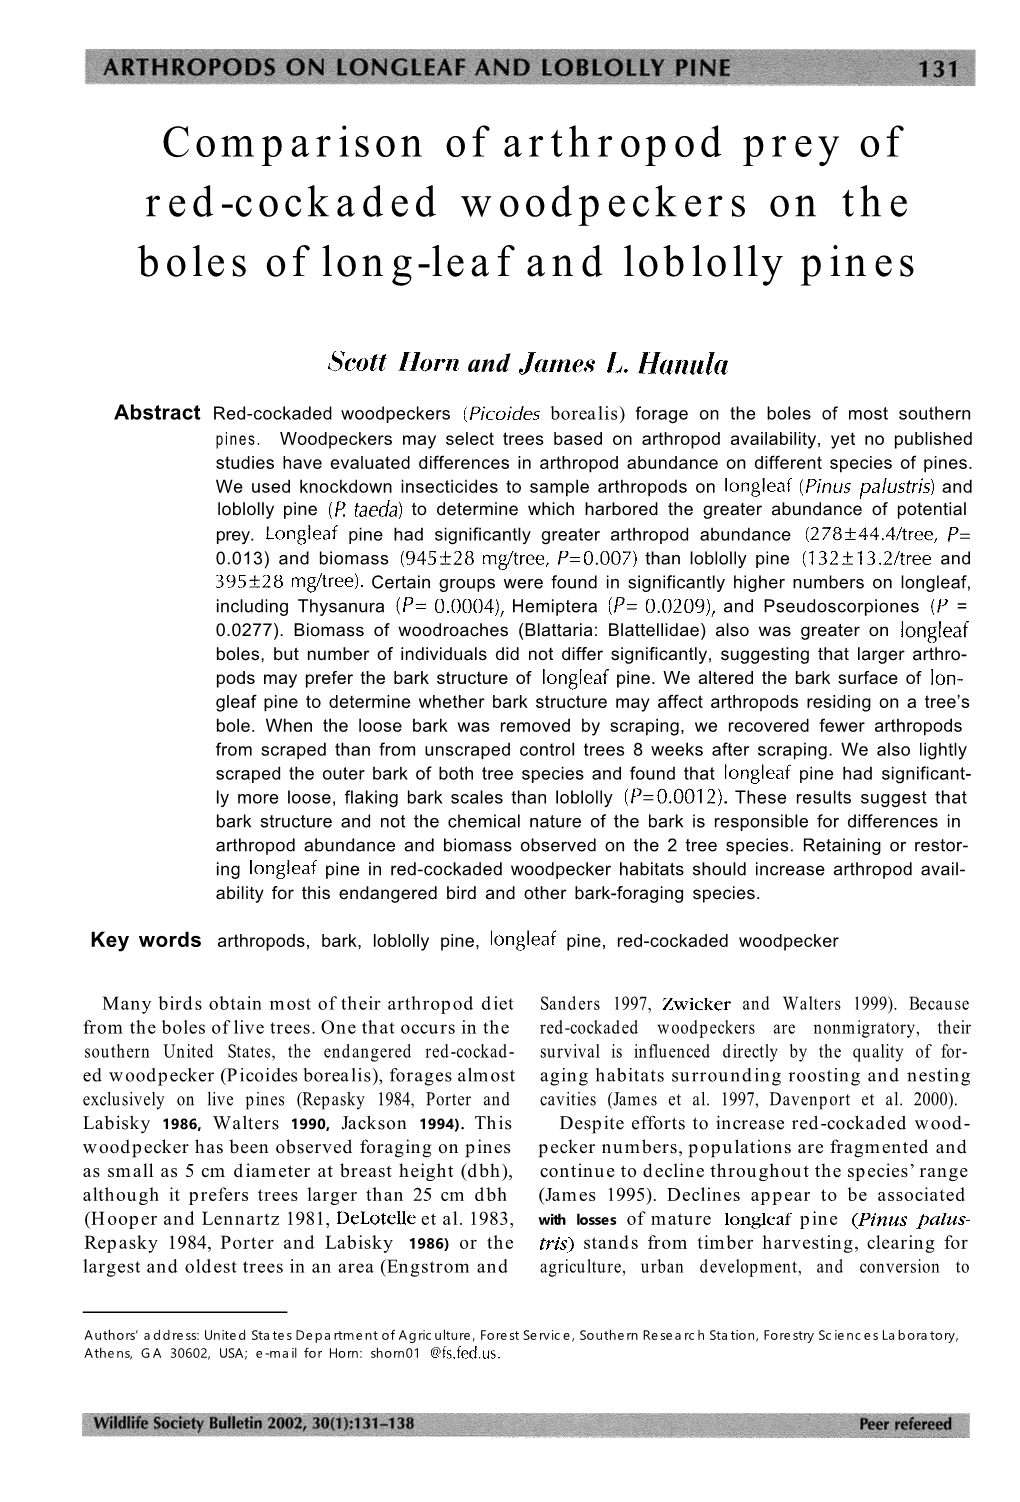 Comparison of Arthropod Prey of Red-Cockaded Woodpeckers on the Boles of Long-Leaf and Loblolly Pines